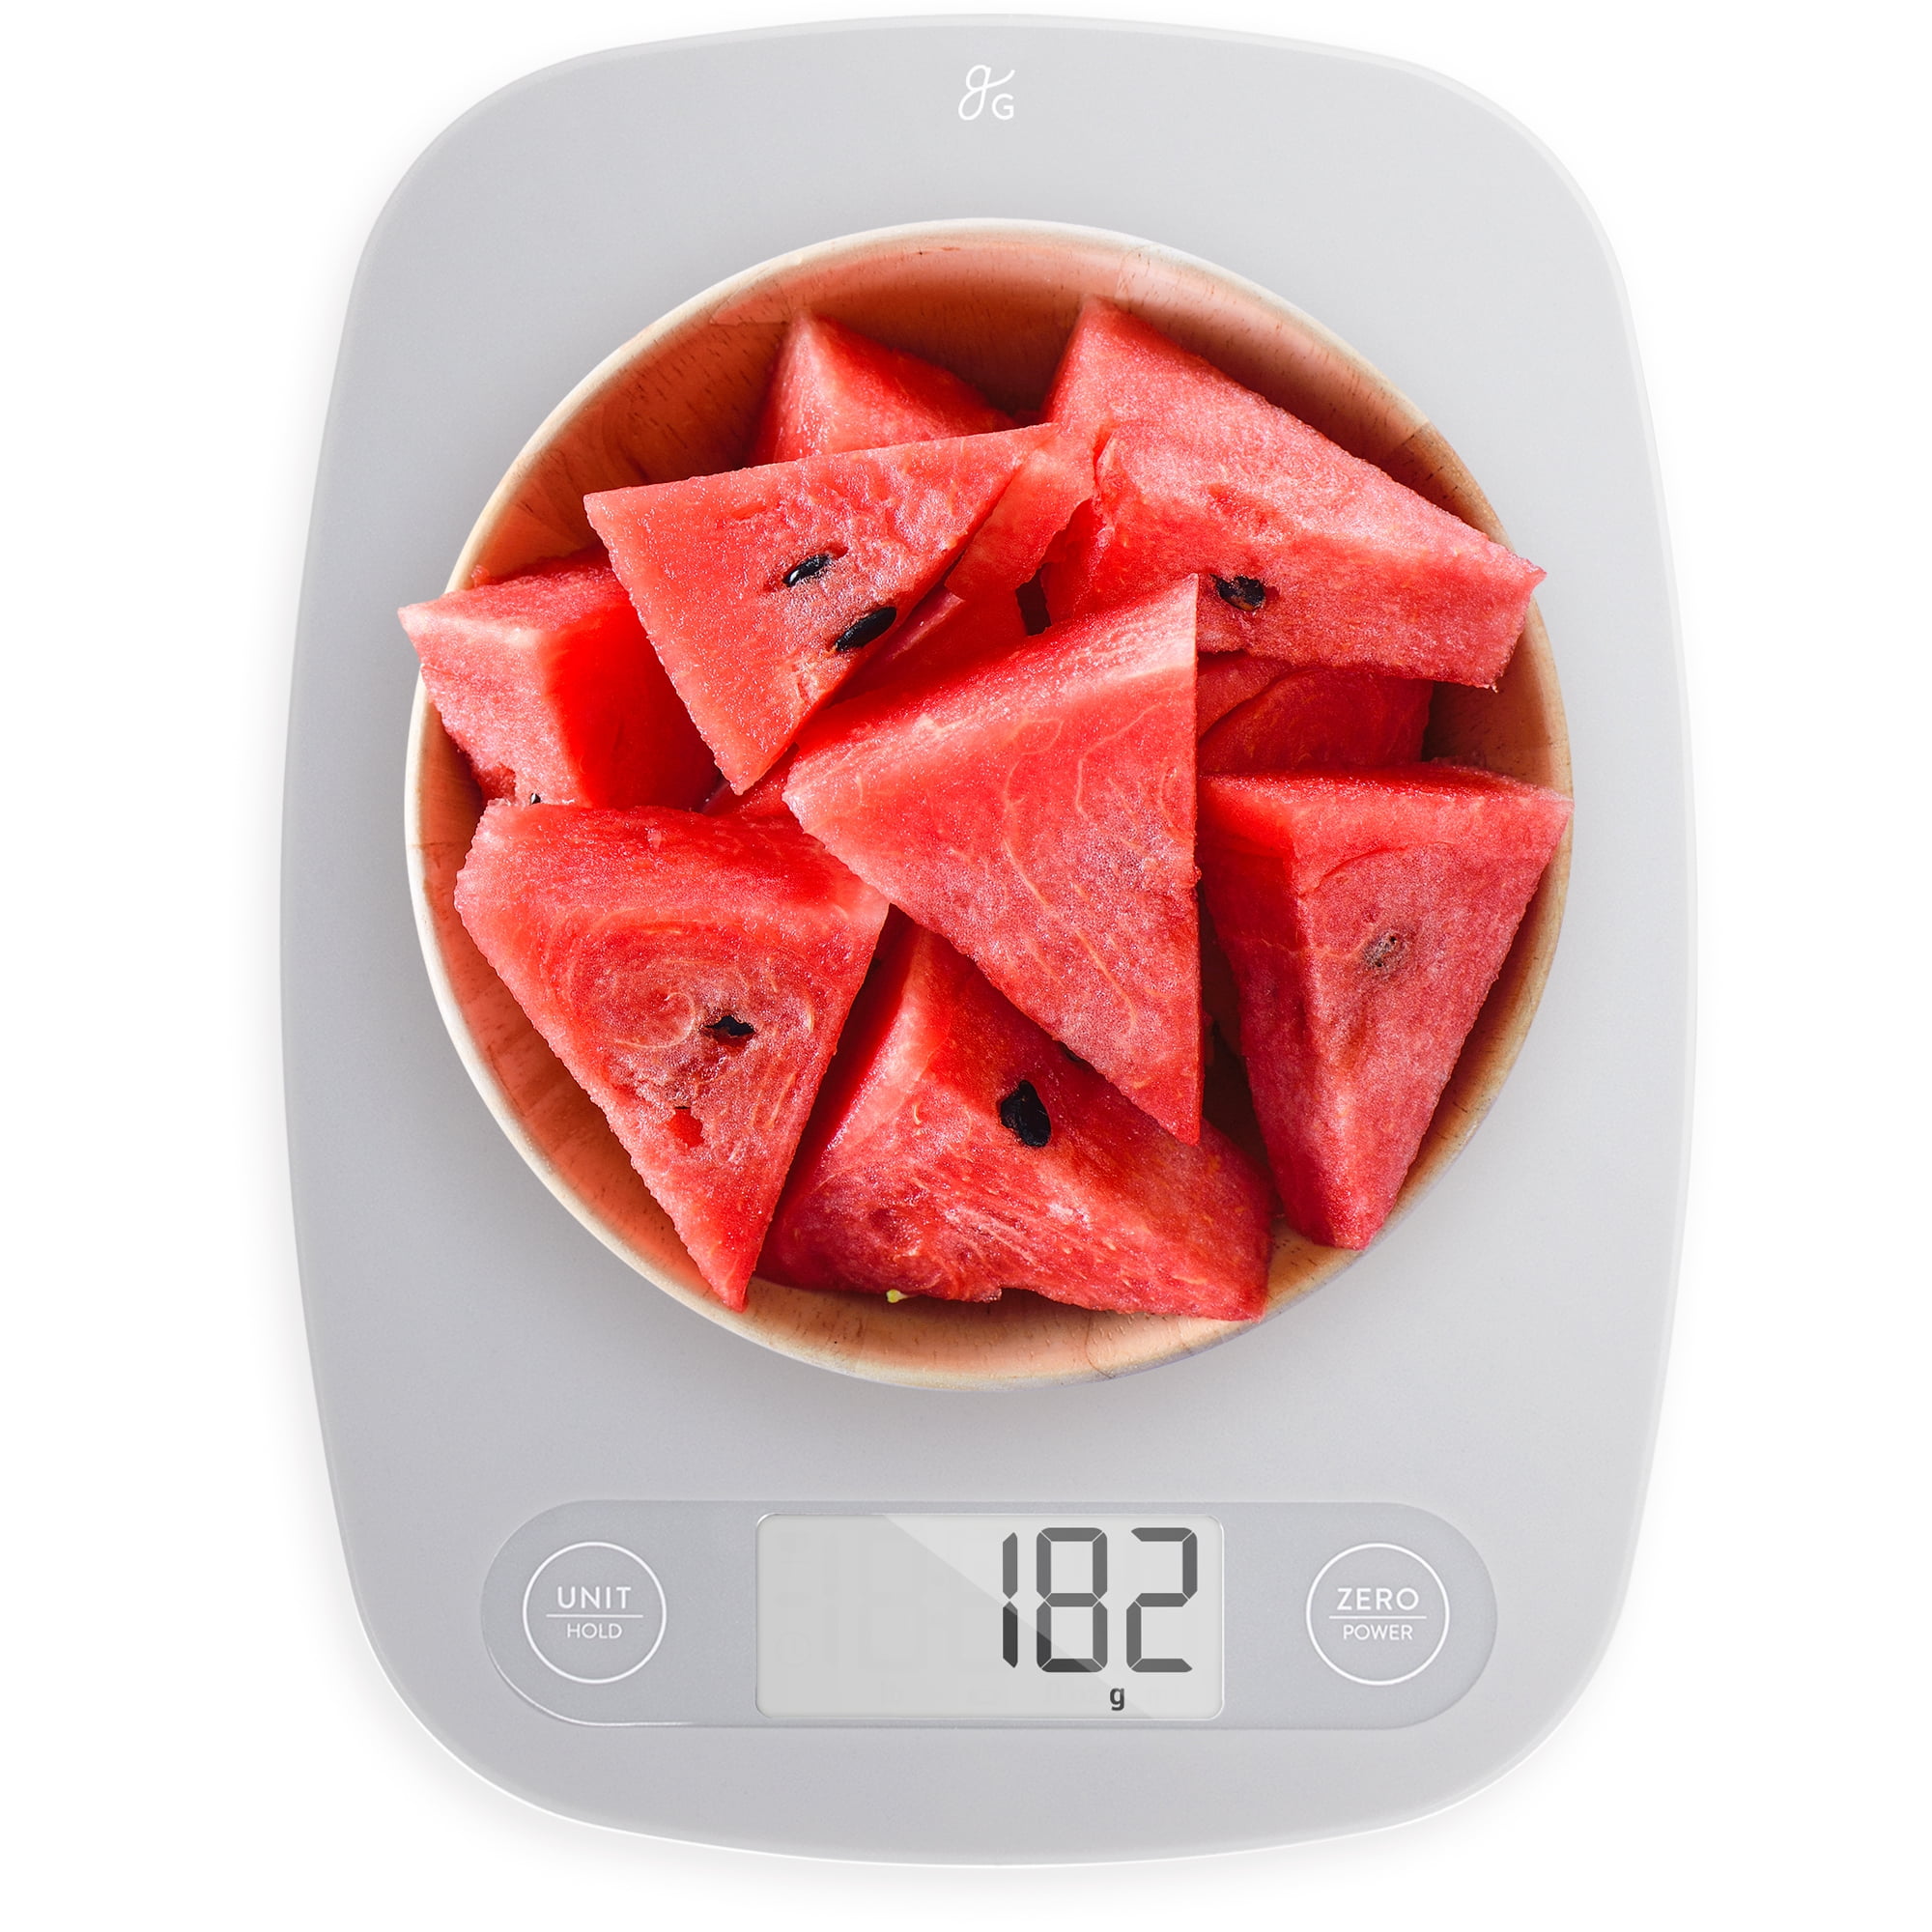 Greater Goods Gray Food Scale - Digital Display Shows Weight in